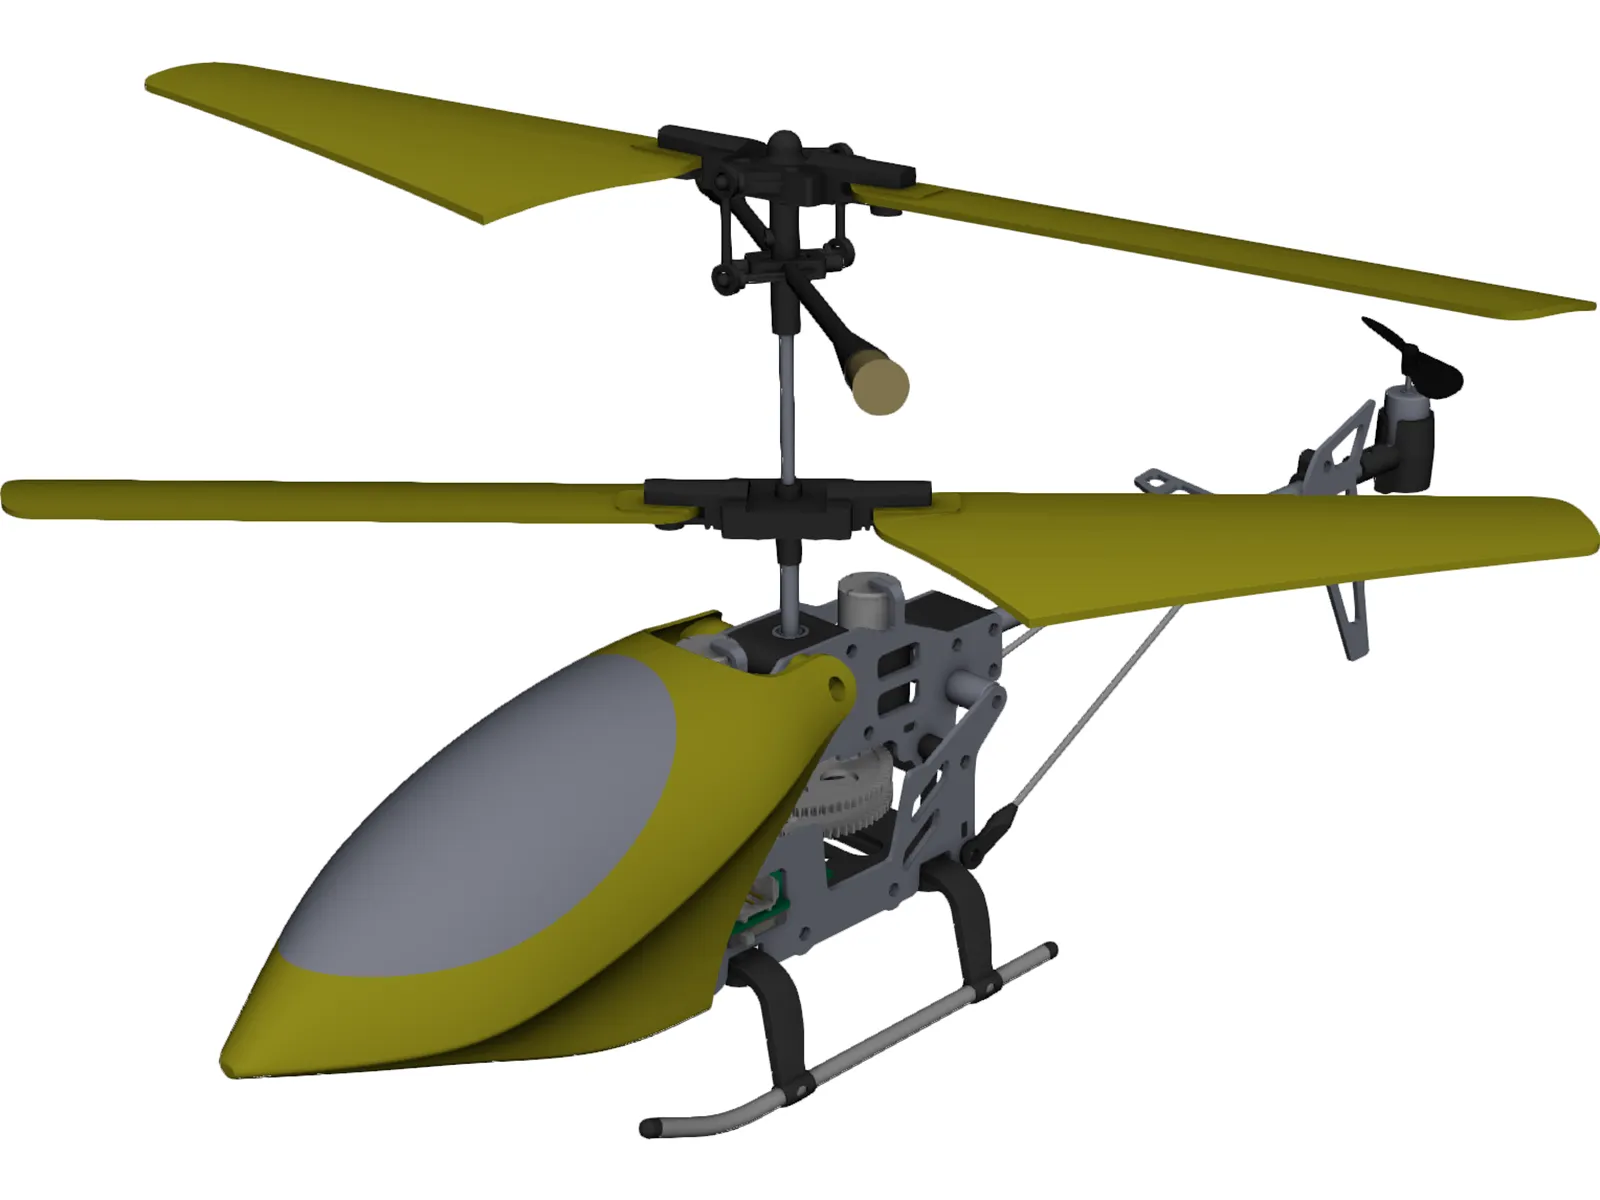 RC Helicopter 3D Model